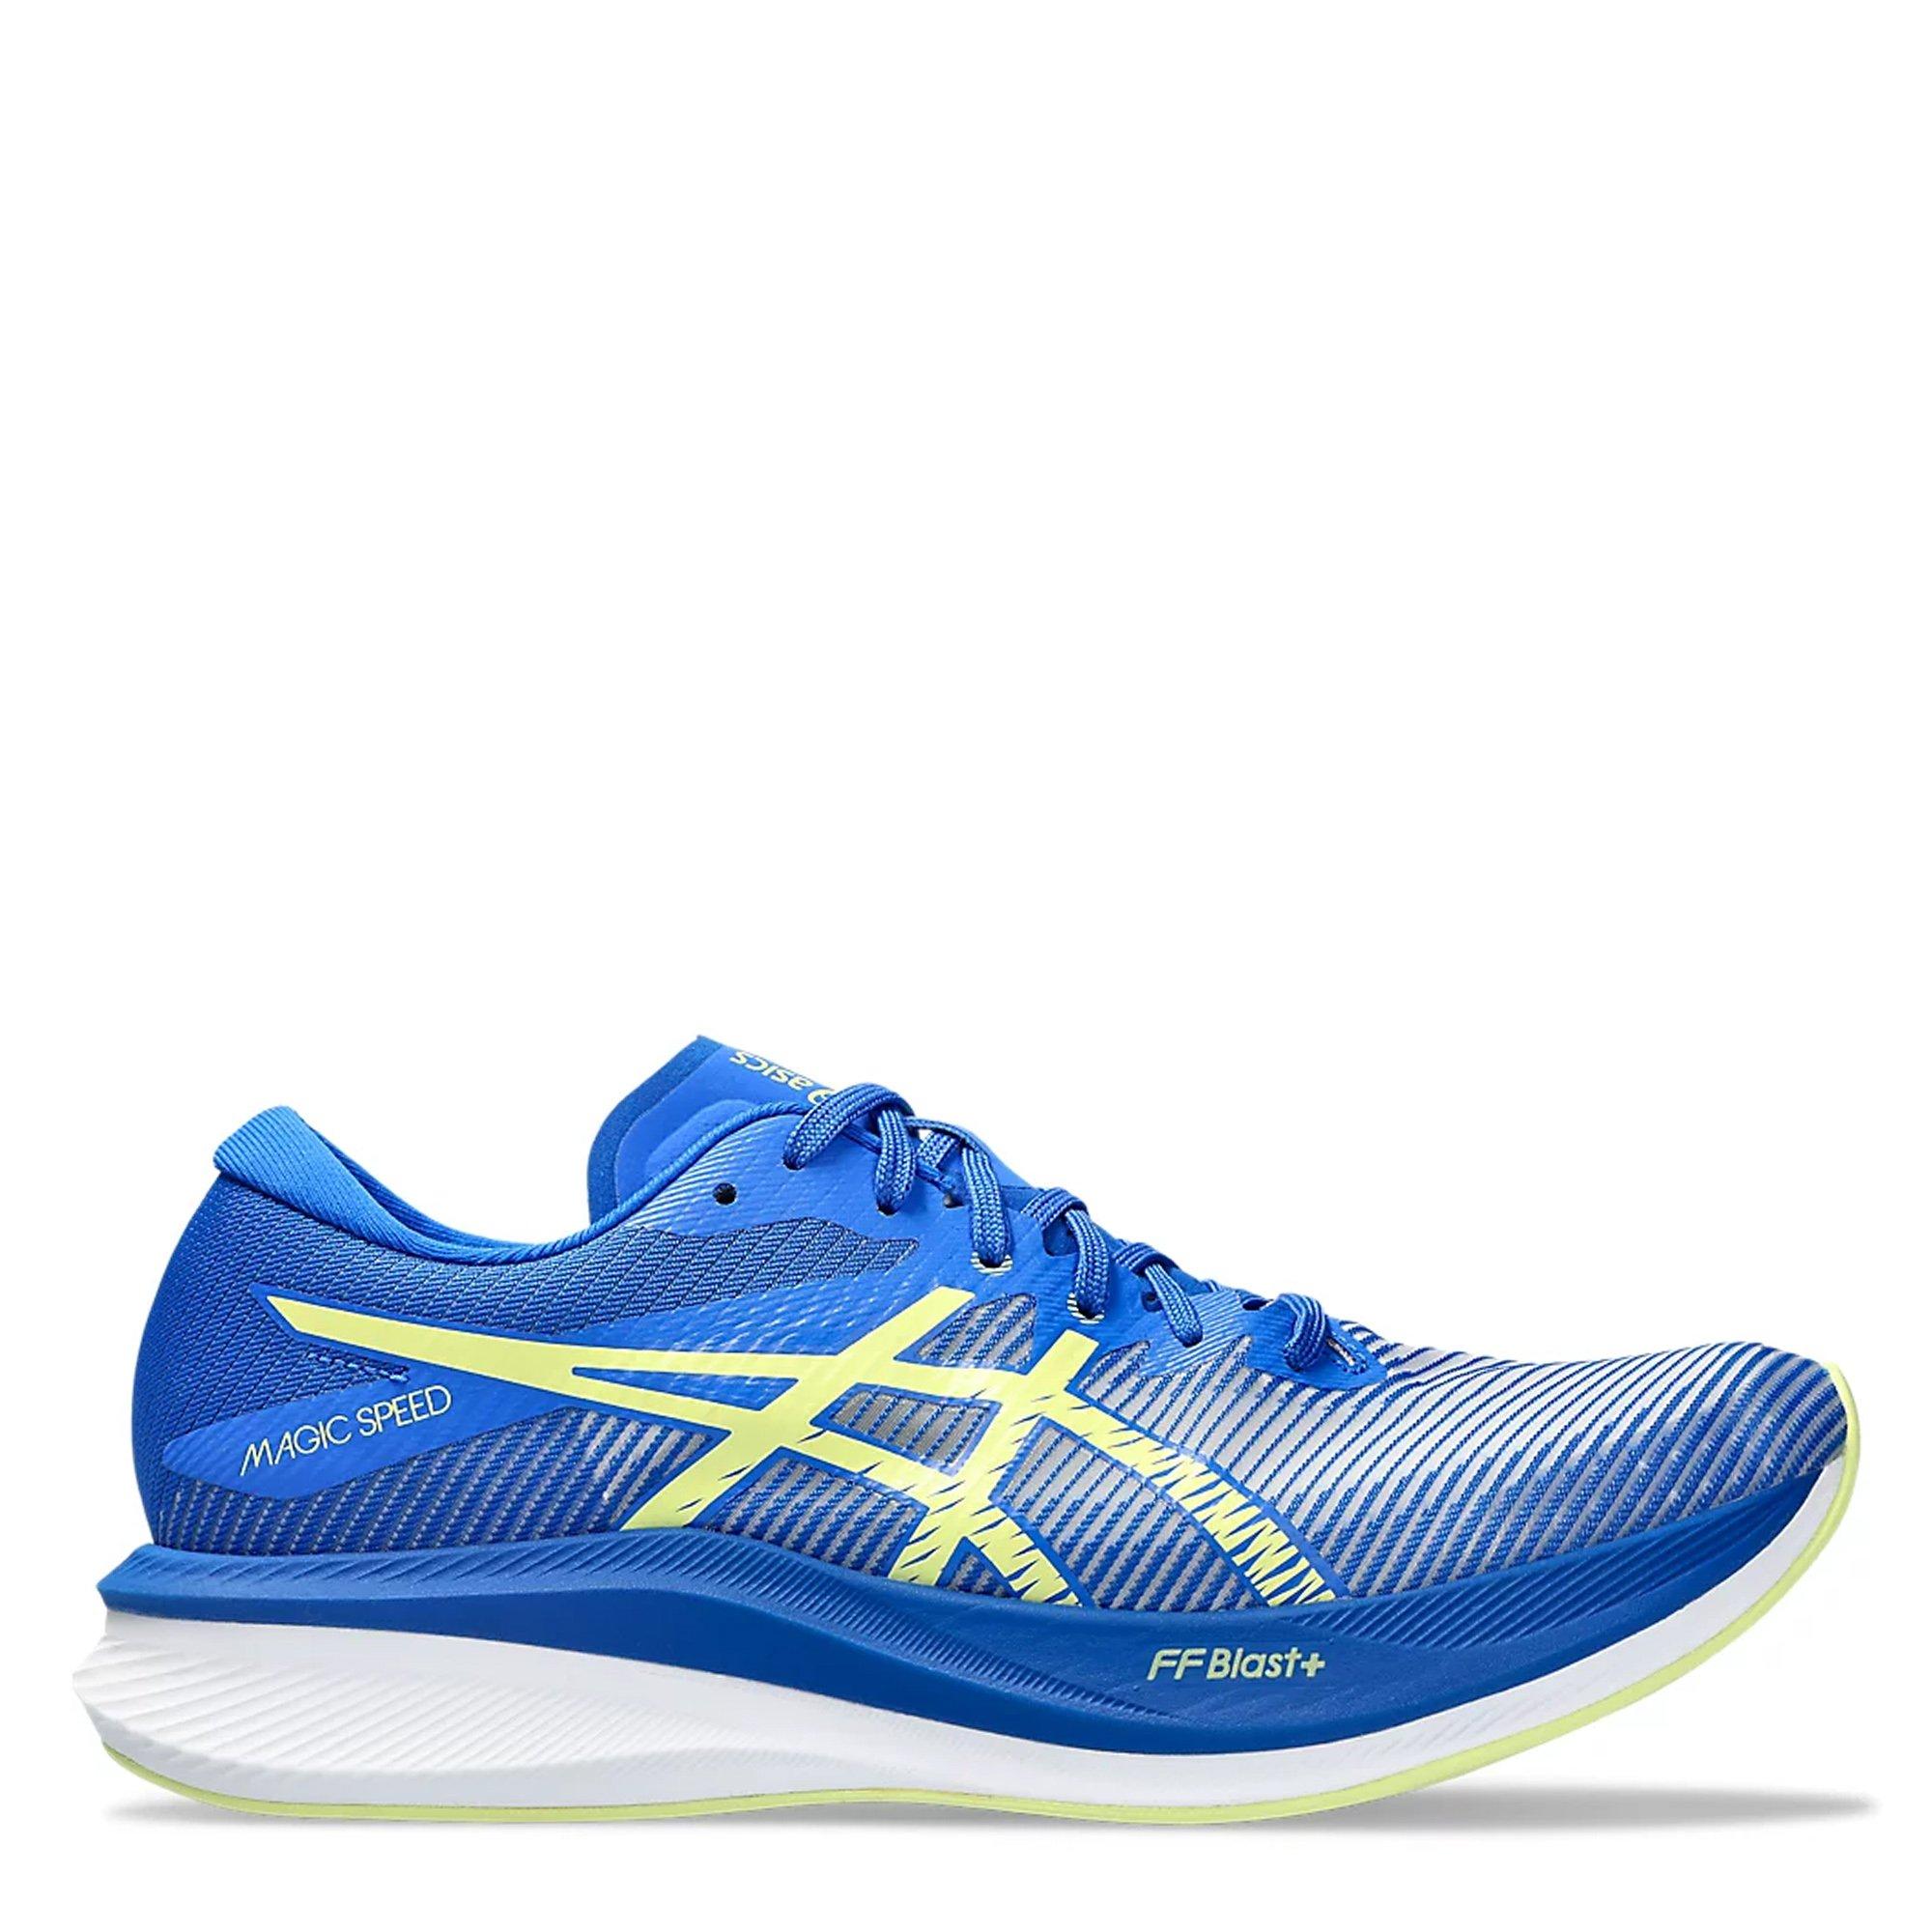 Asics | Magic Speed 3 Mens Running Shoes | Fast Neutral Road